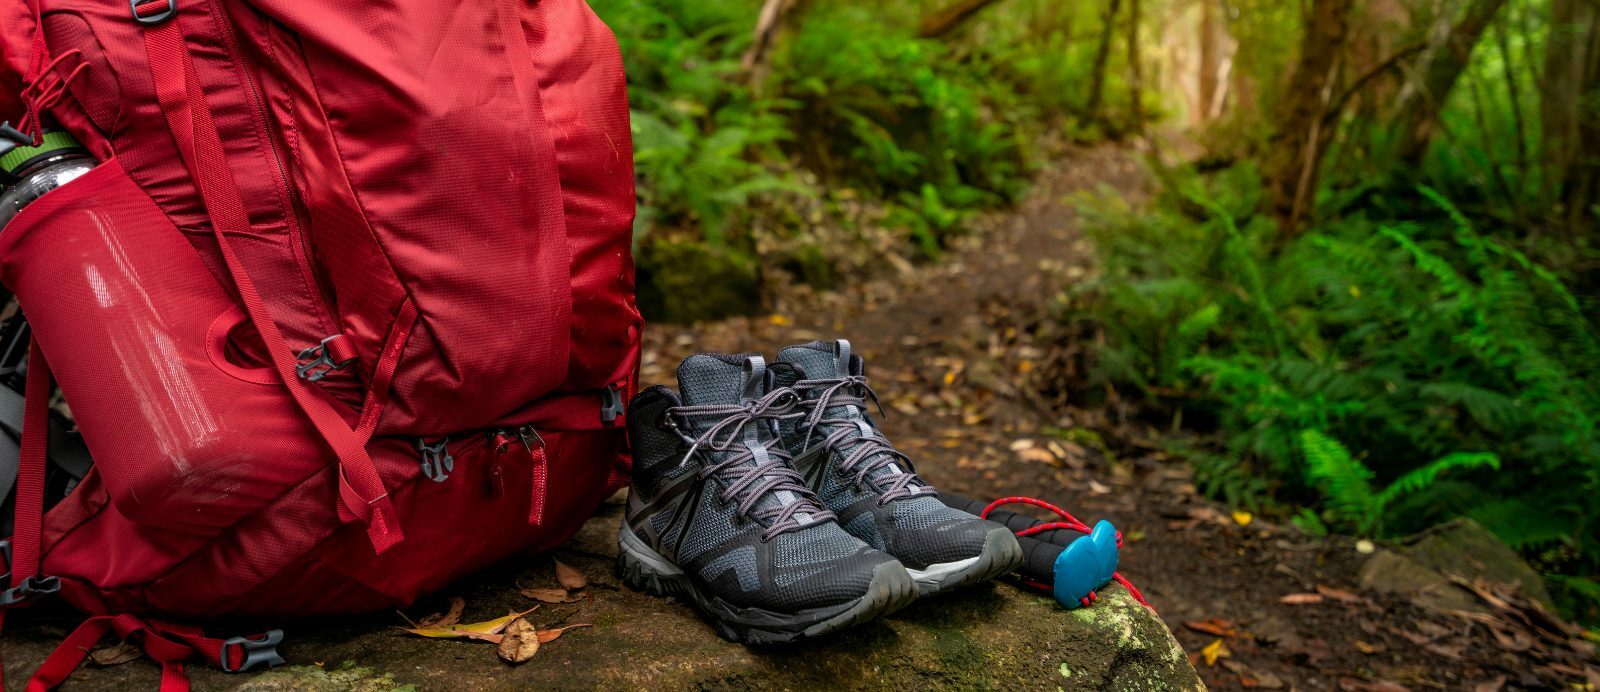 Is Expensive Hiking Gear Worth It? - Wild Women On Top